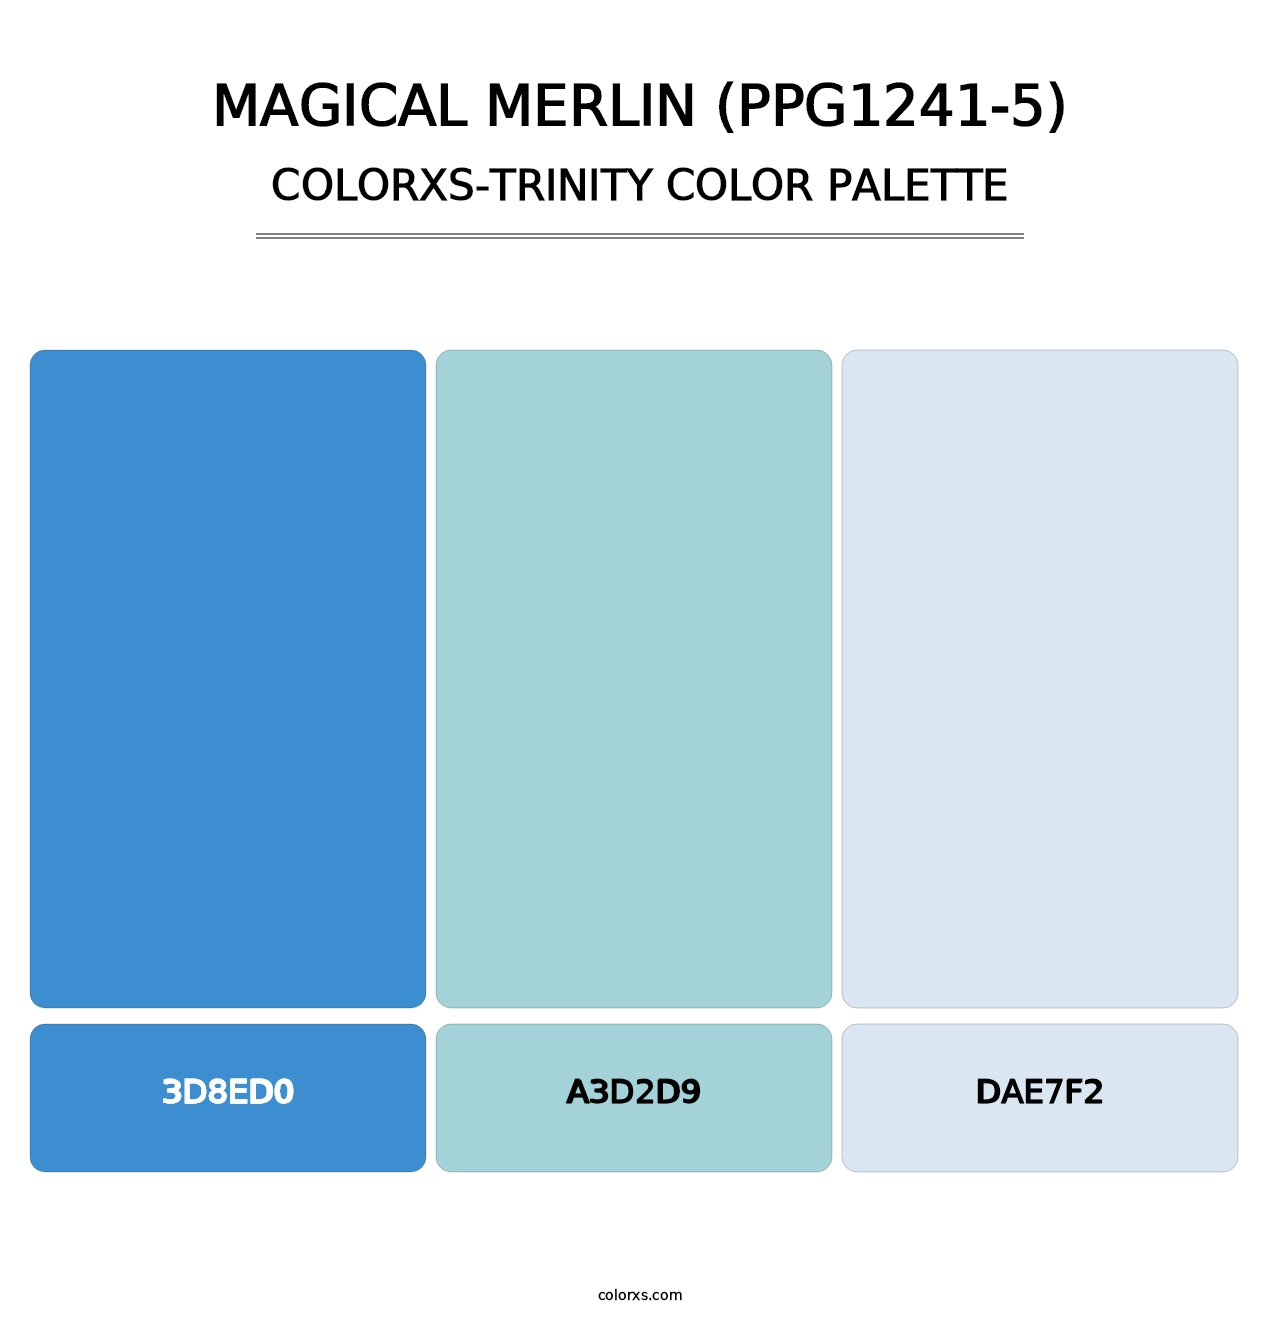 Magical Merlin (PPG1241-5) - Colorxs Trinity Palette